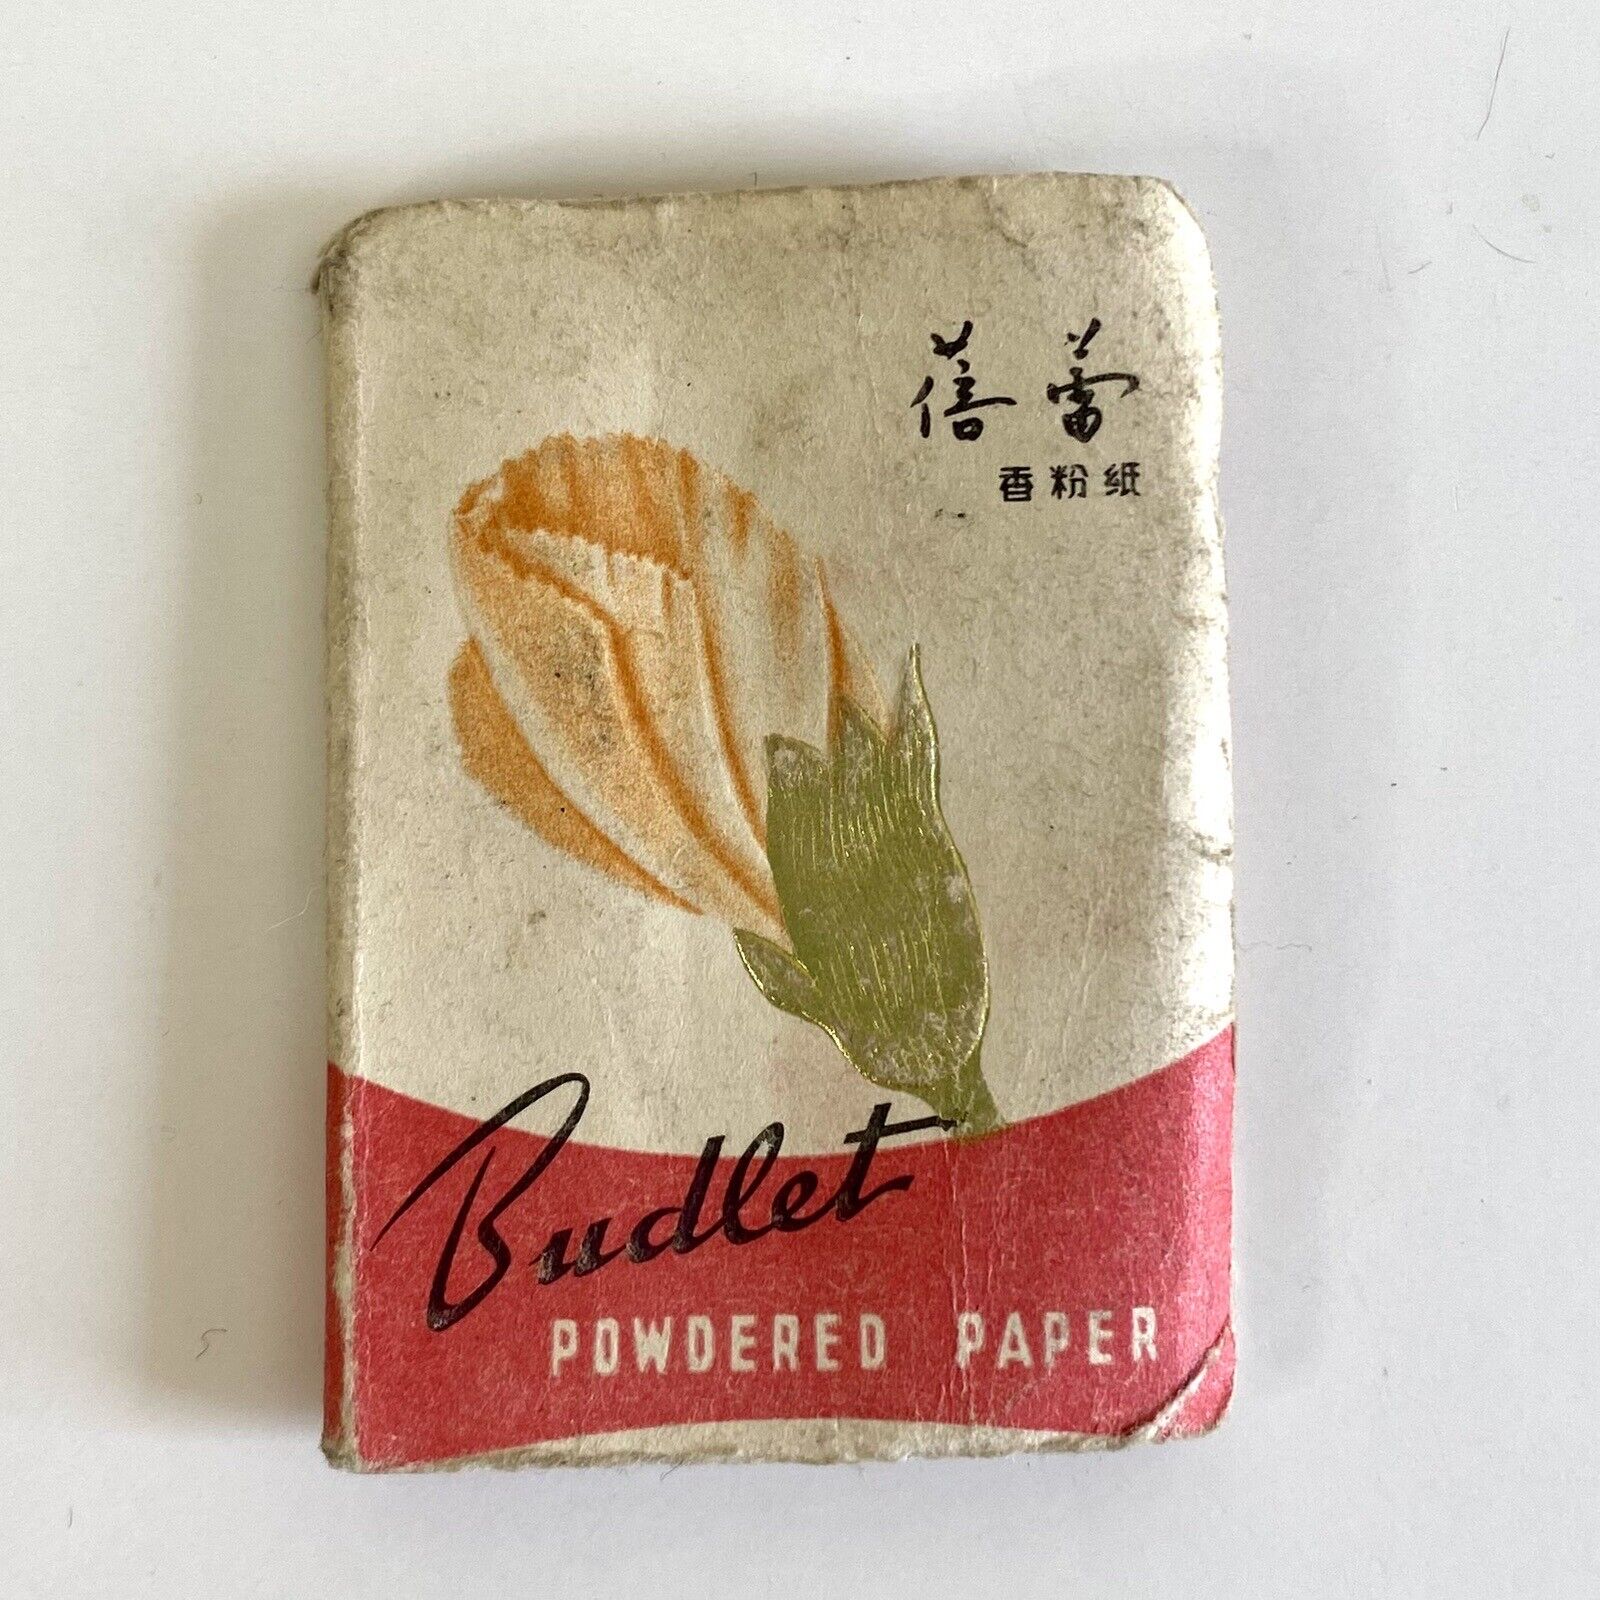 Vintage cosmetic blotting powdered paper Budlet papier poudre, 1920s-40s vanity